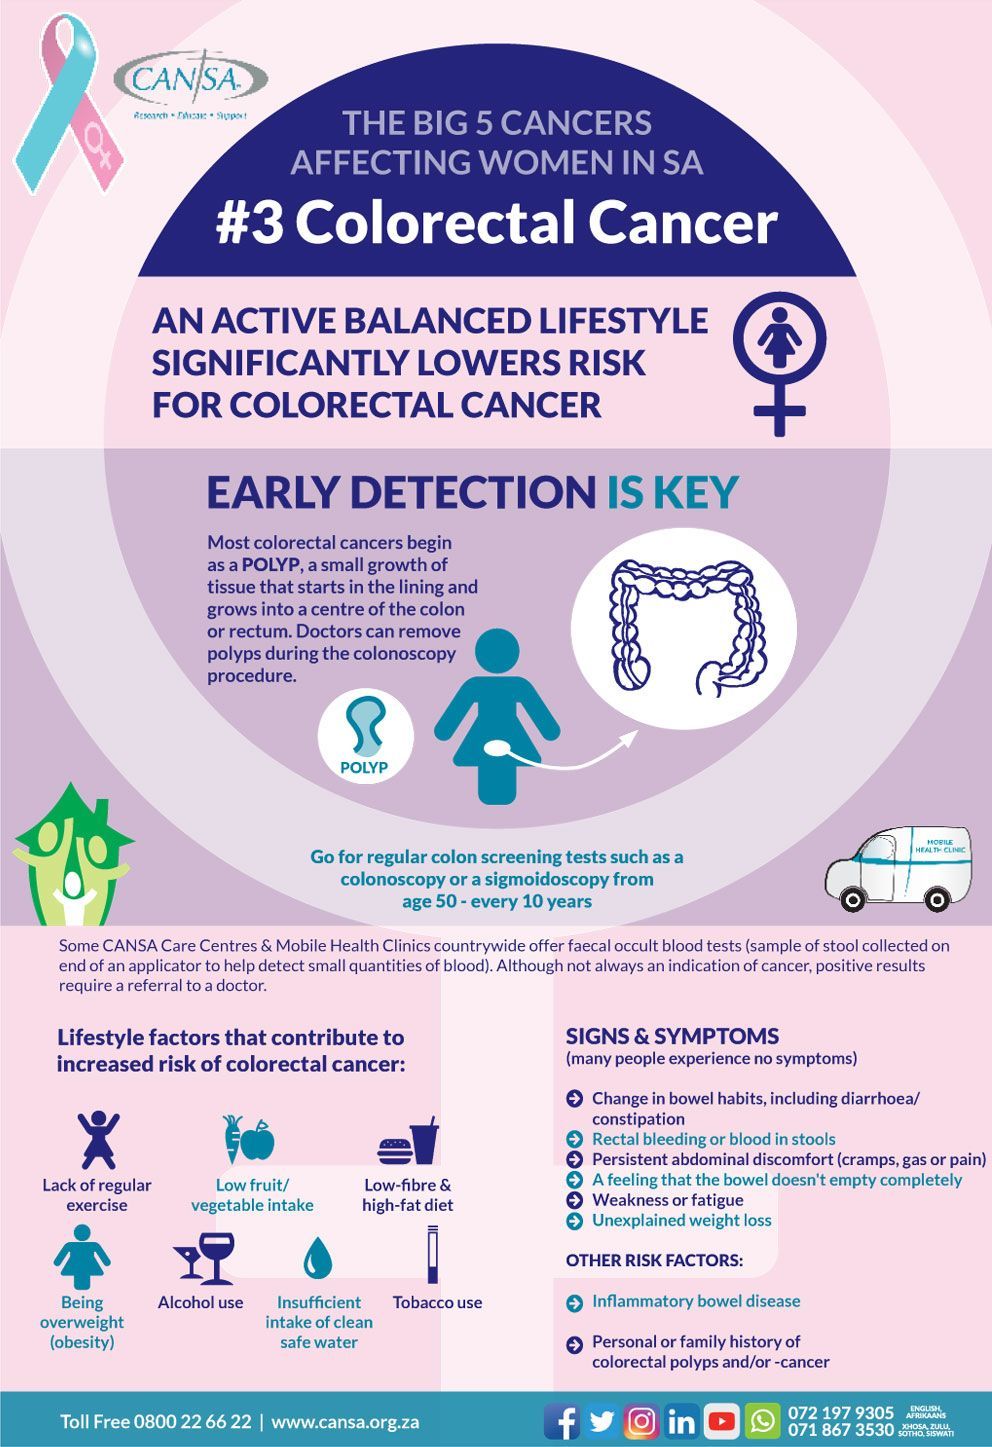 The big 5 cancers affecting women in South Africa